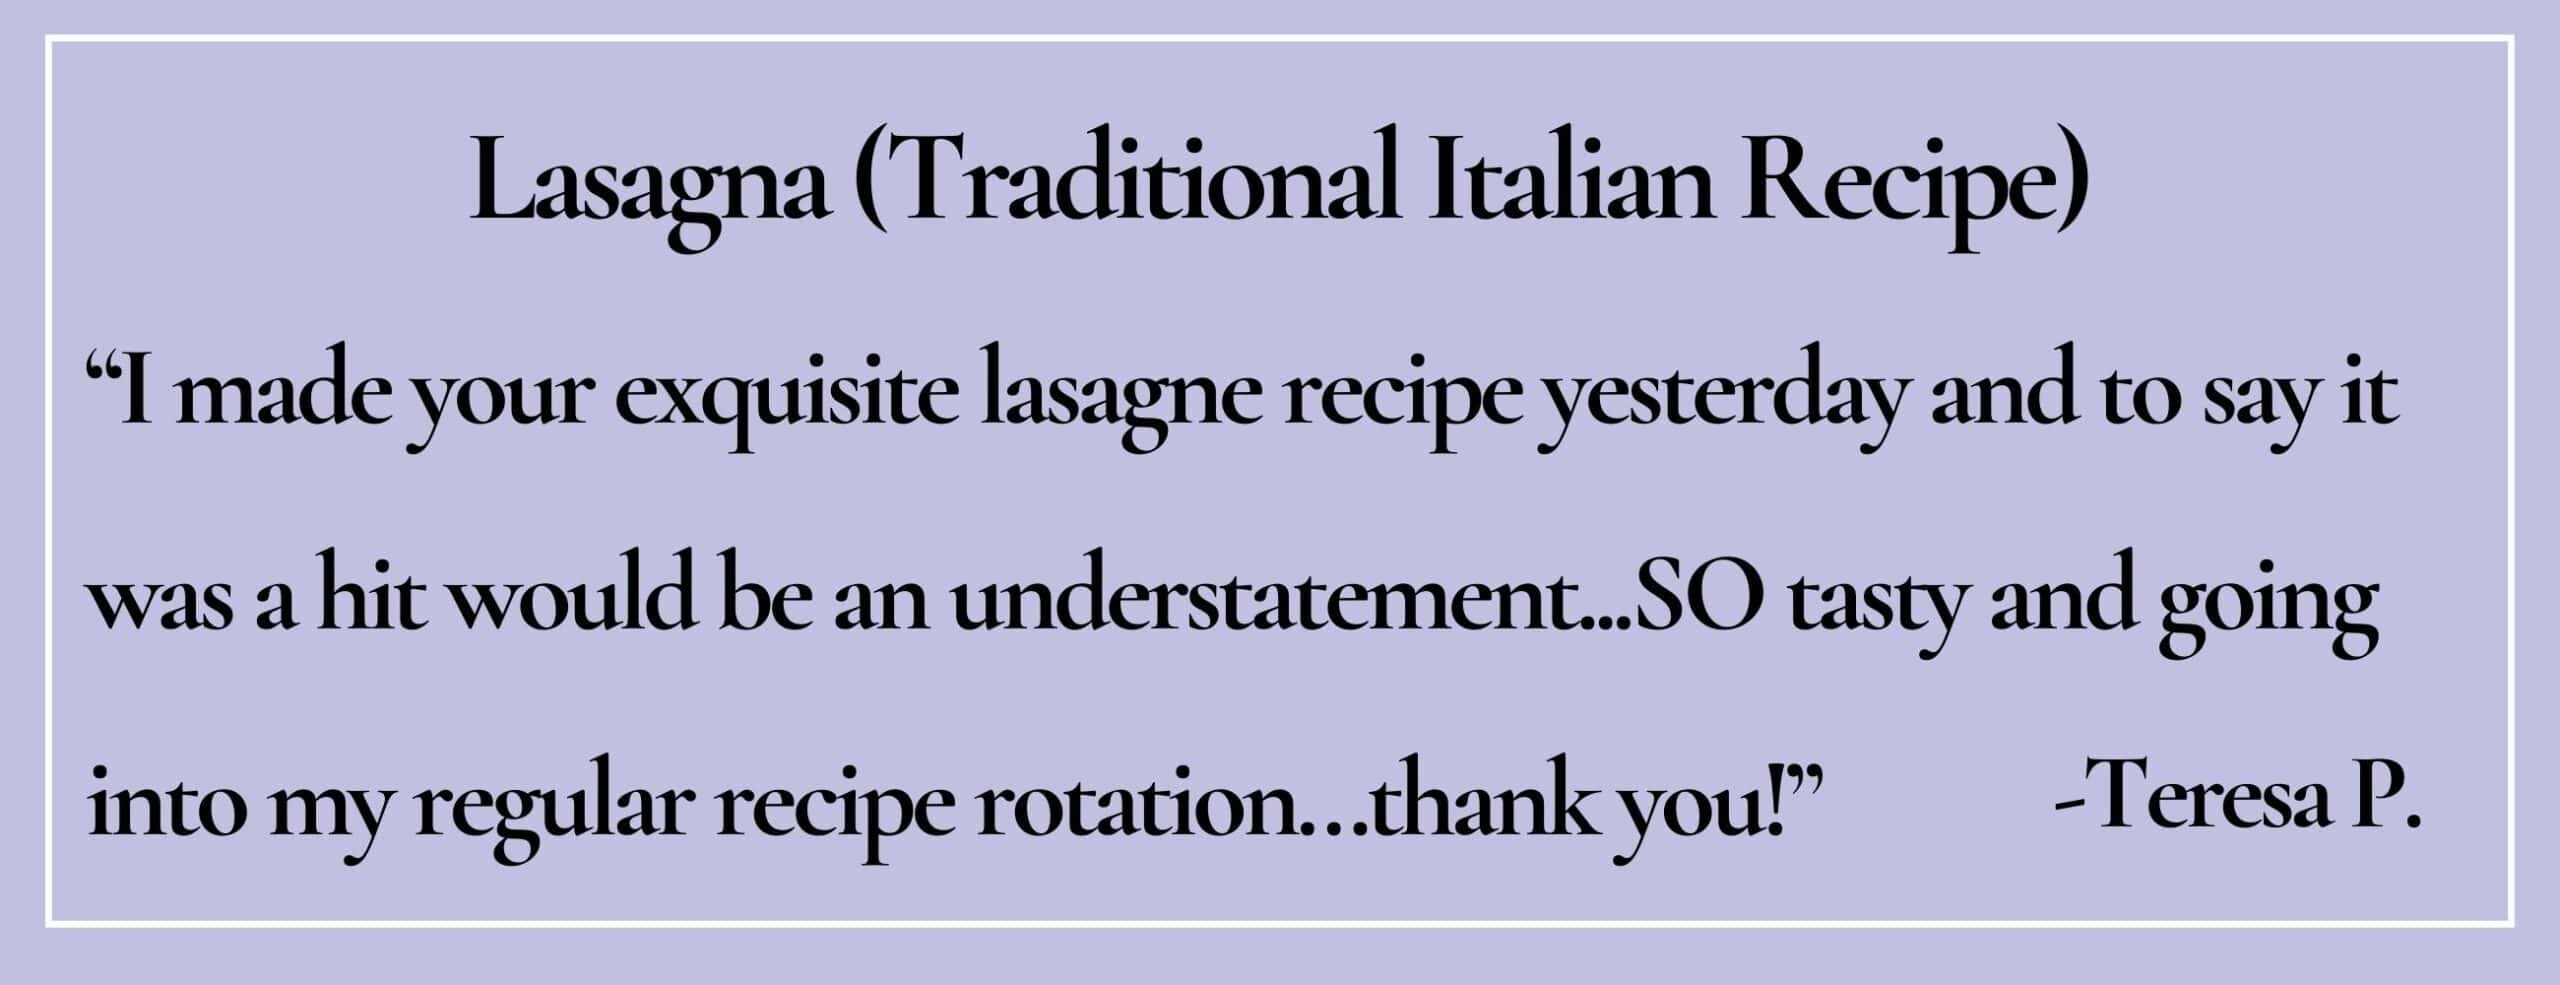 text box with paraphrase: I made your exquisite lasagne recipe and to say it was a hit would be an understatement - Teresa